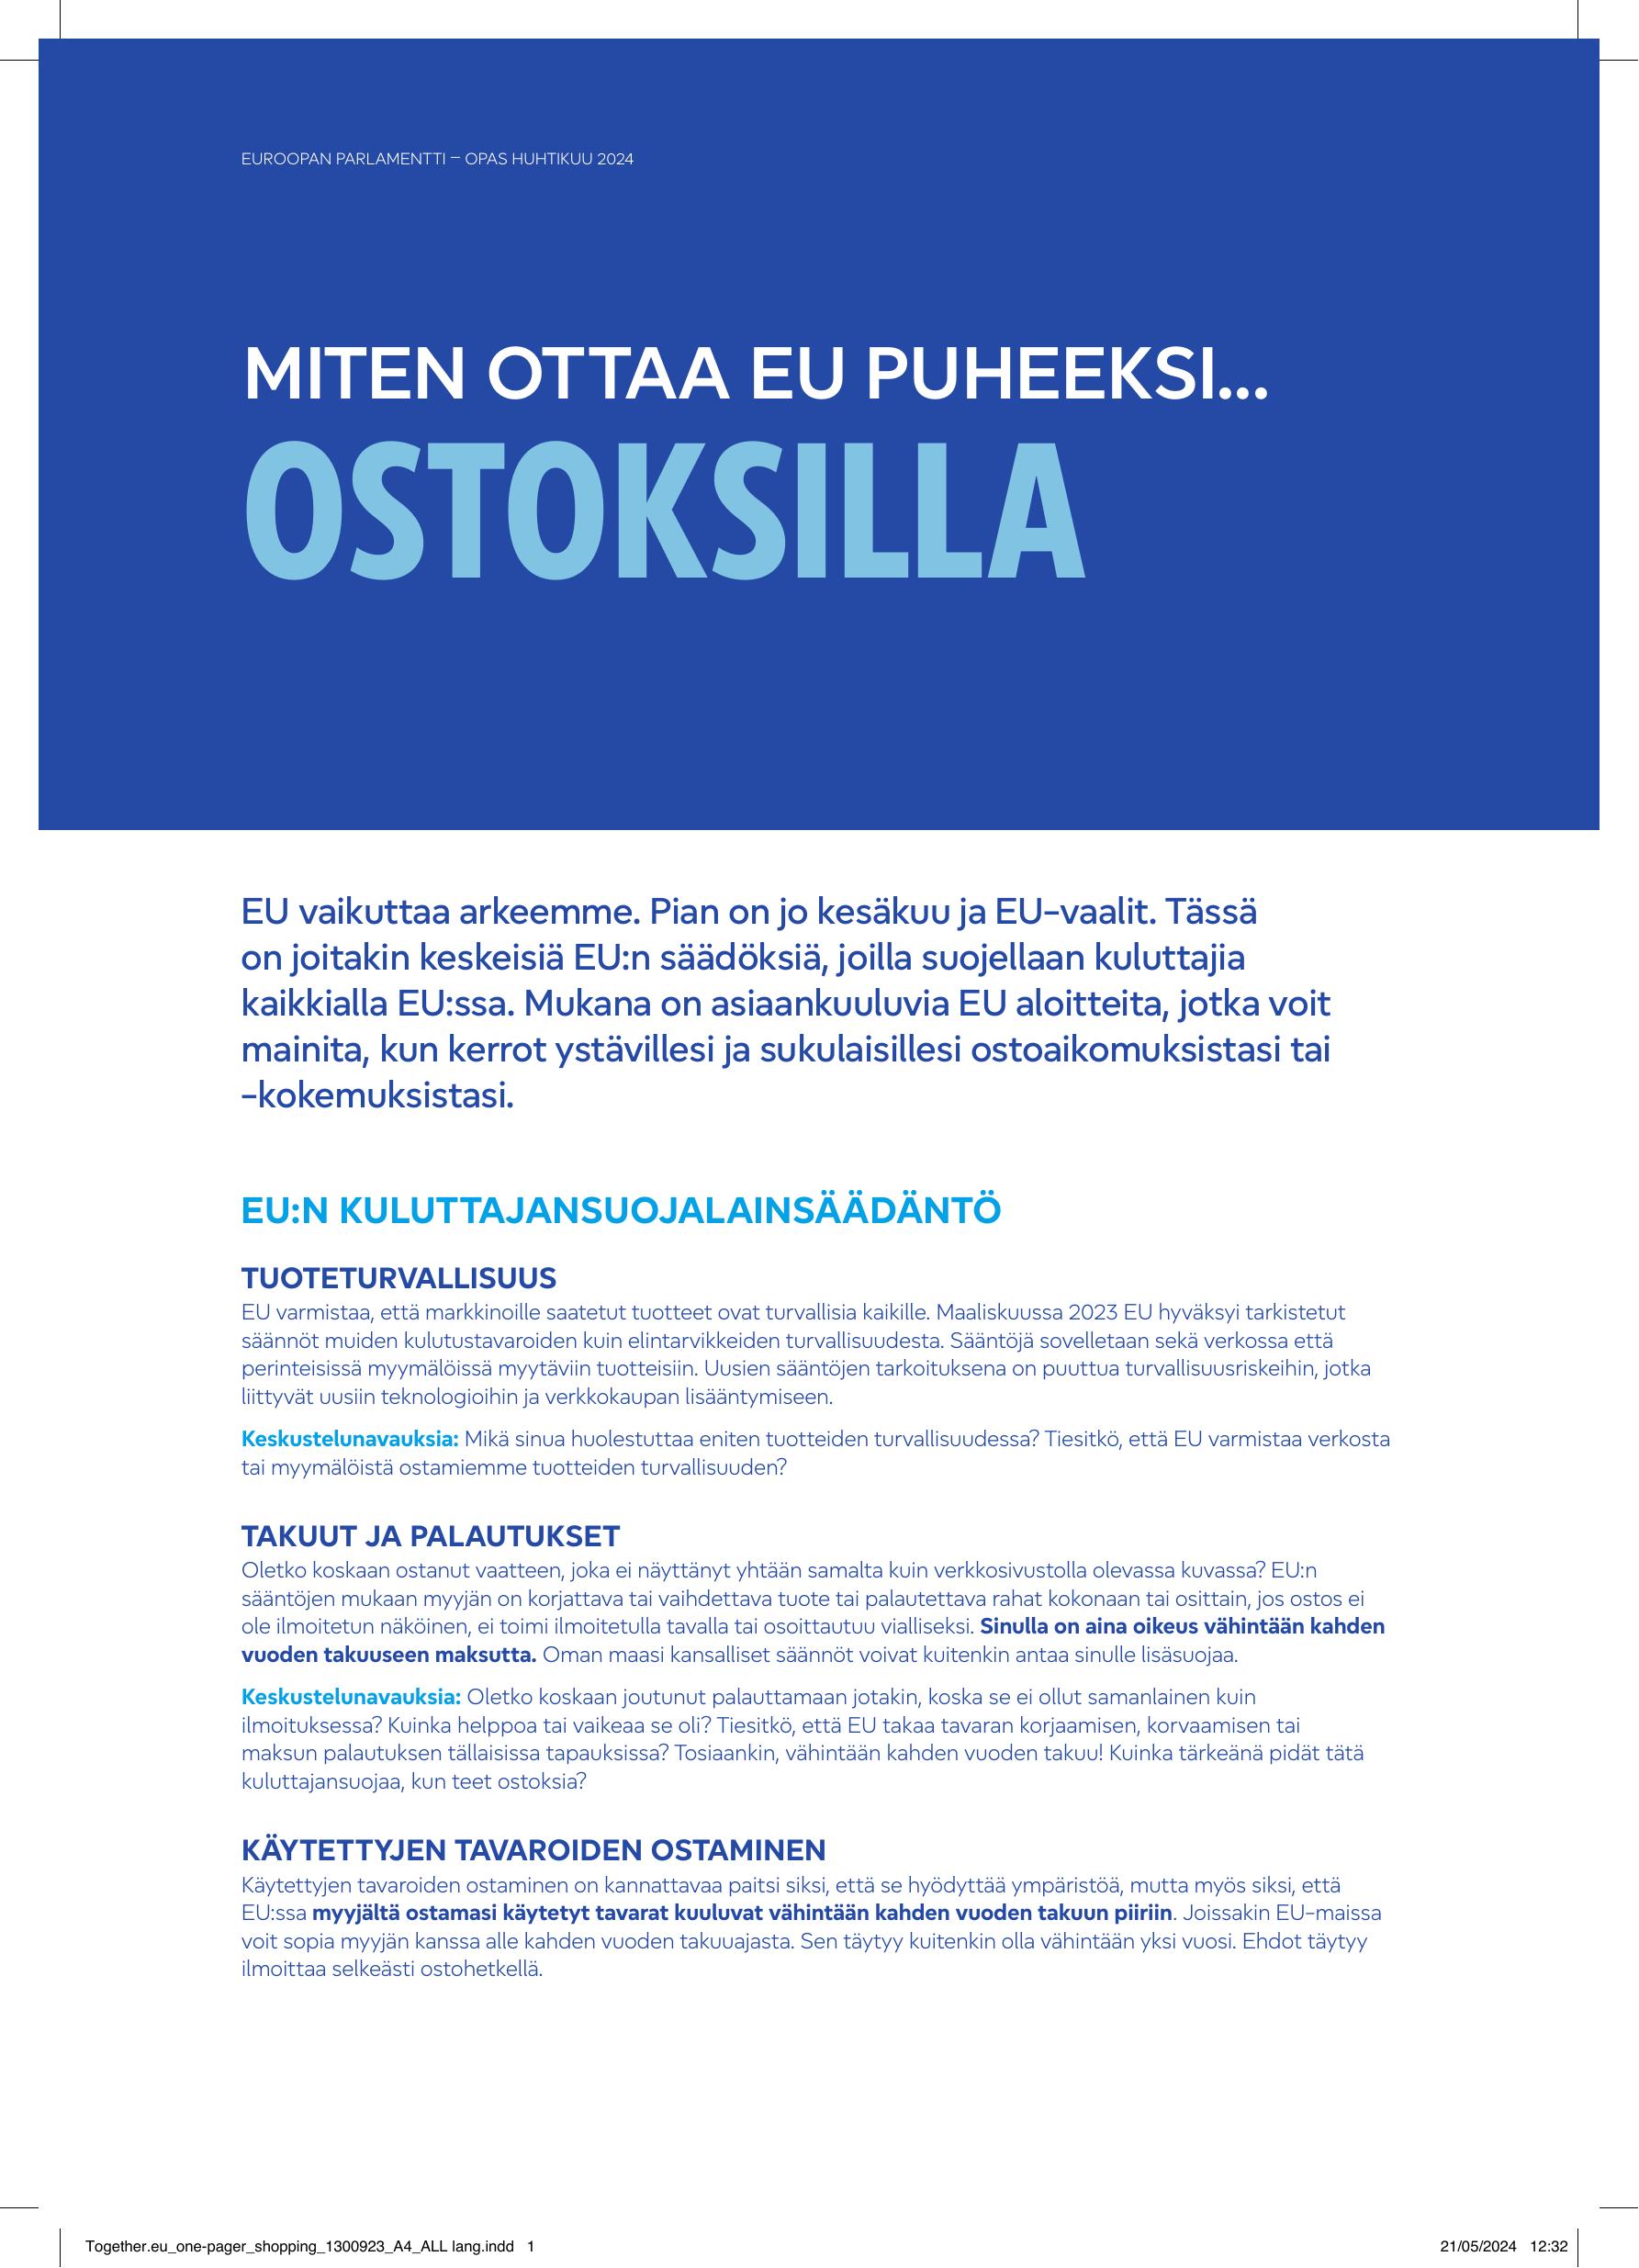 Together.eu_one-pager_shopping_2_print.pdf